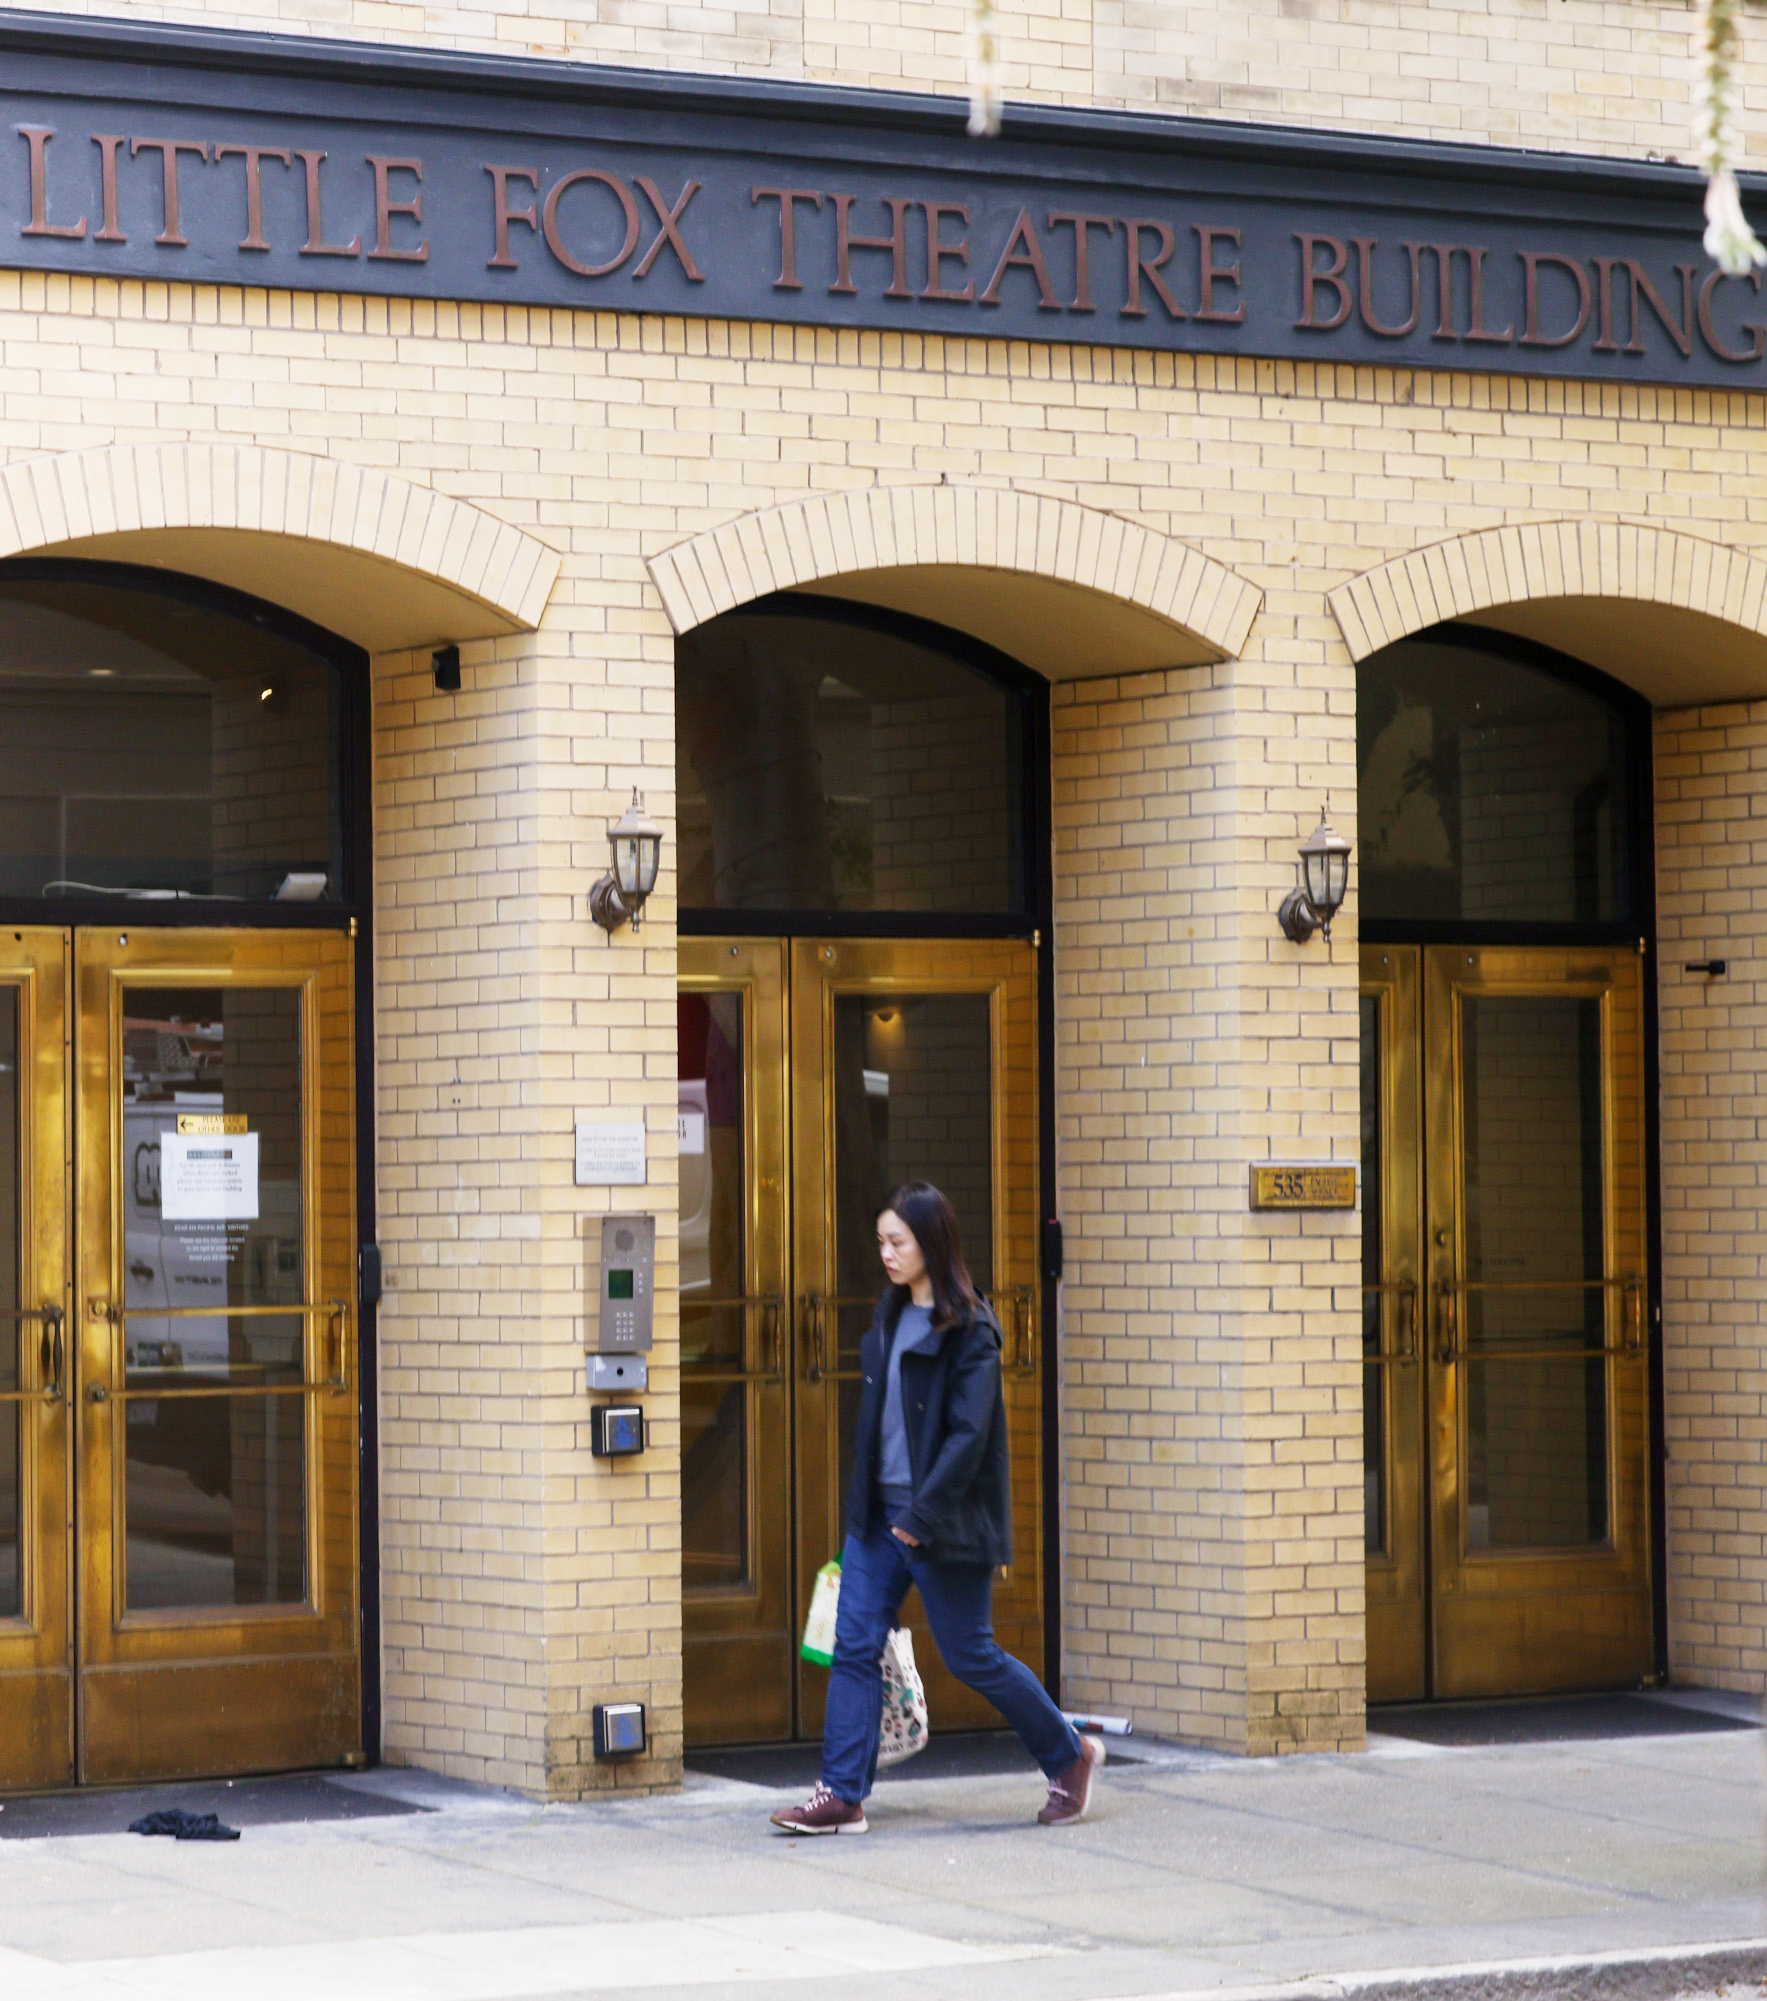 A person walks by the entrance of the &quot;Little Fox Theatre Building&quot; with arched doorways.